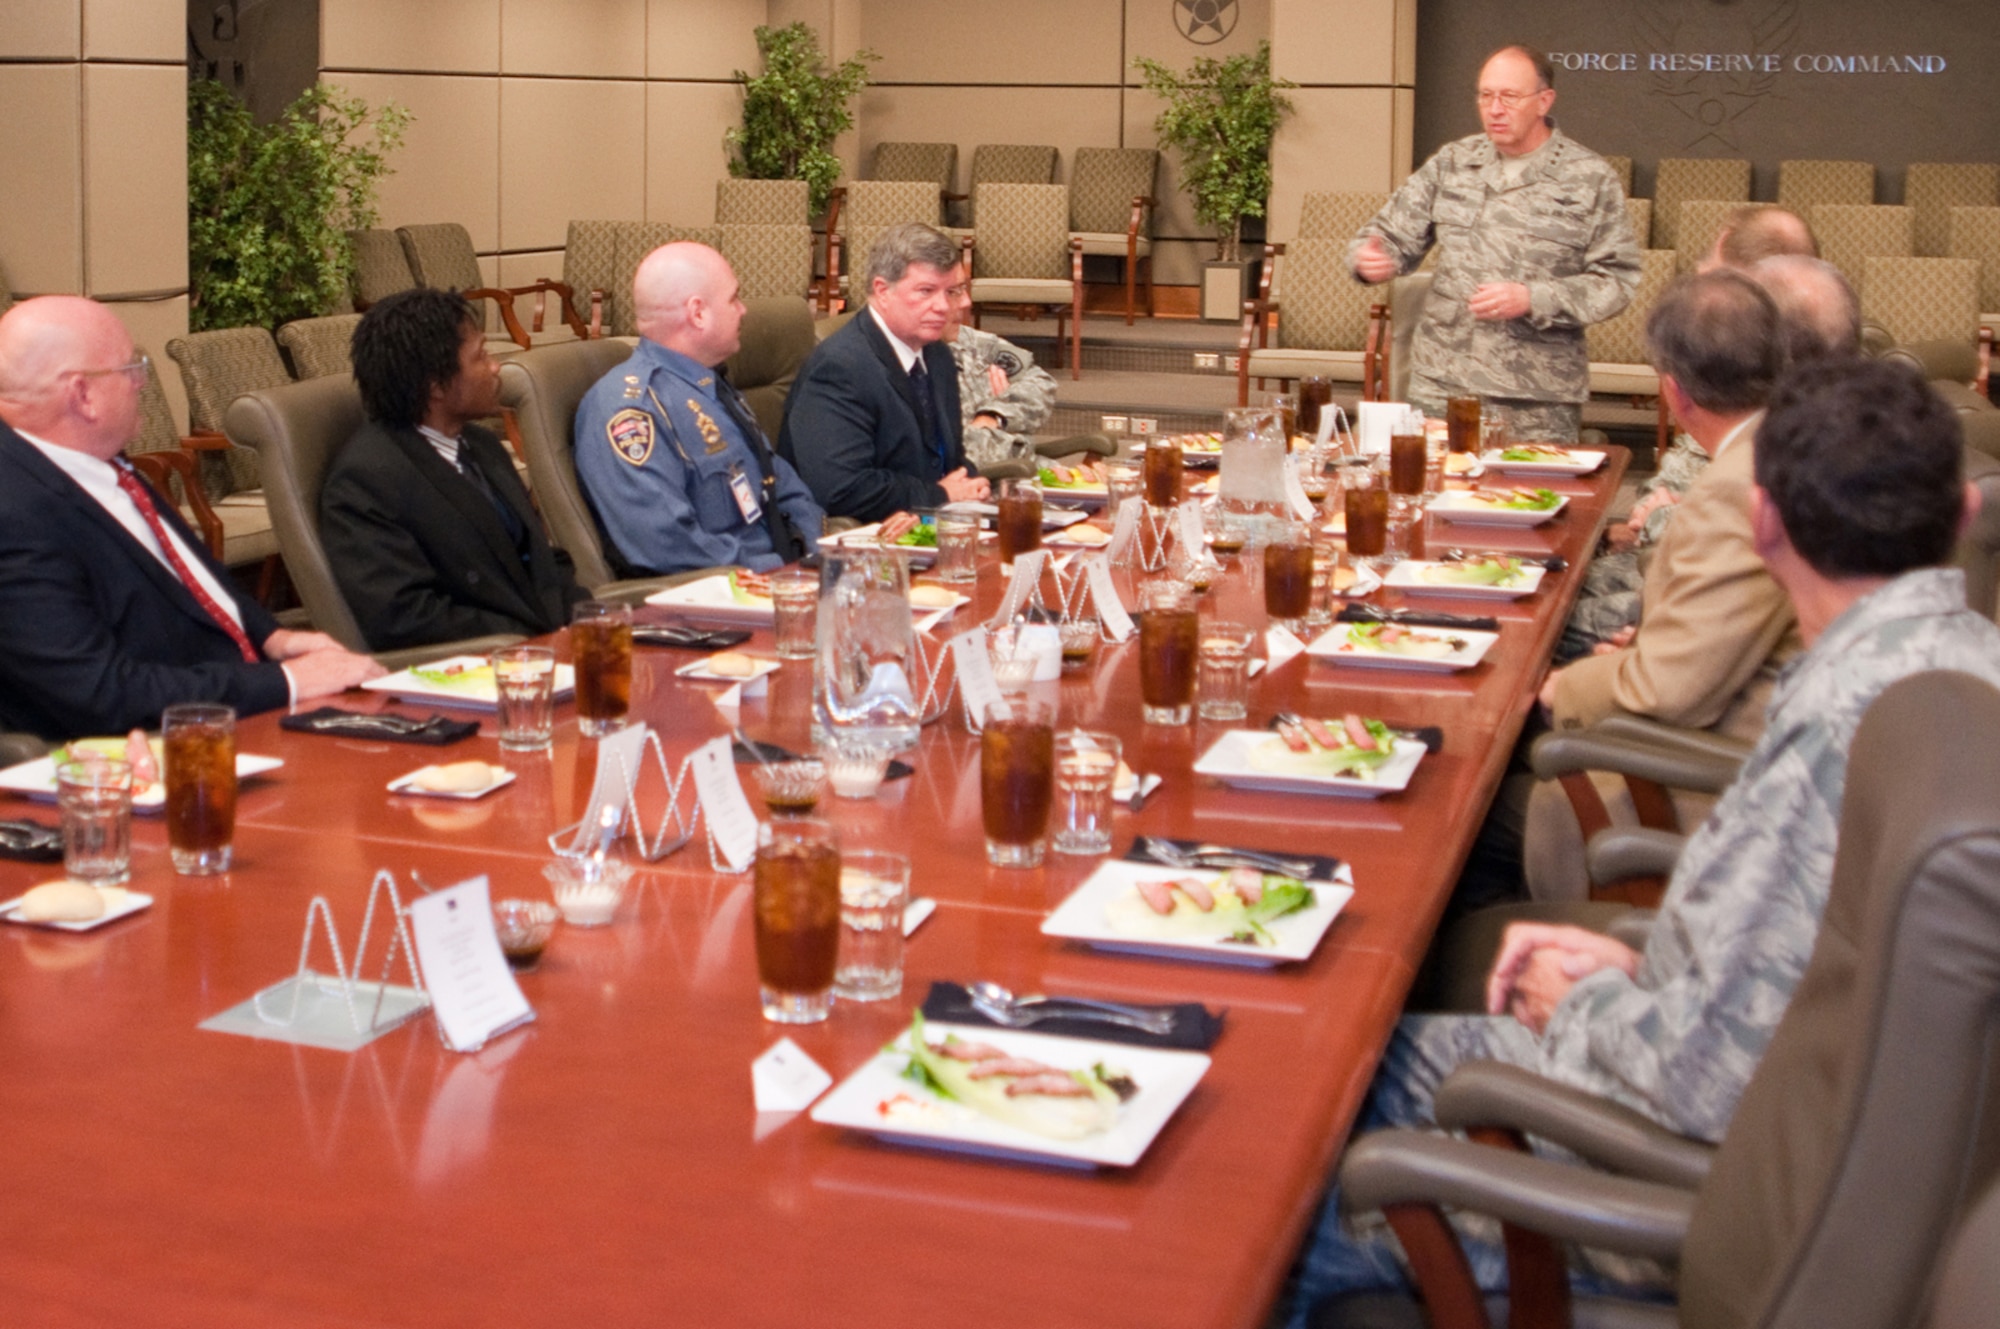 Lt. Gen. Charles E. Stenner Jr., commander of Air Force Reserve Command, speaks to local employers and fellow military officers at a luncheon Nov. 18, 2010, at Headquarters AFRC, Robins Air Force Base, Ga. The meeting gave the employers and reserve officers an opportunity to discuss employer issues. (U.S. Air Force photo/Staff Sgt. Alexy Saltekoff)